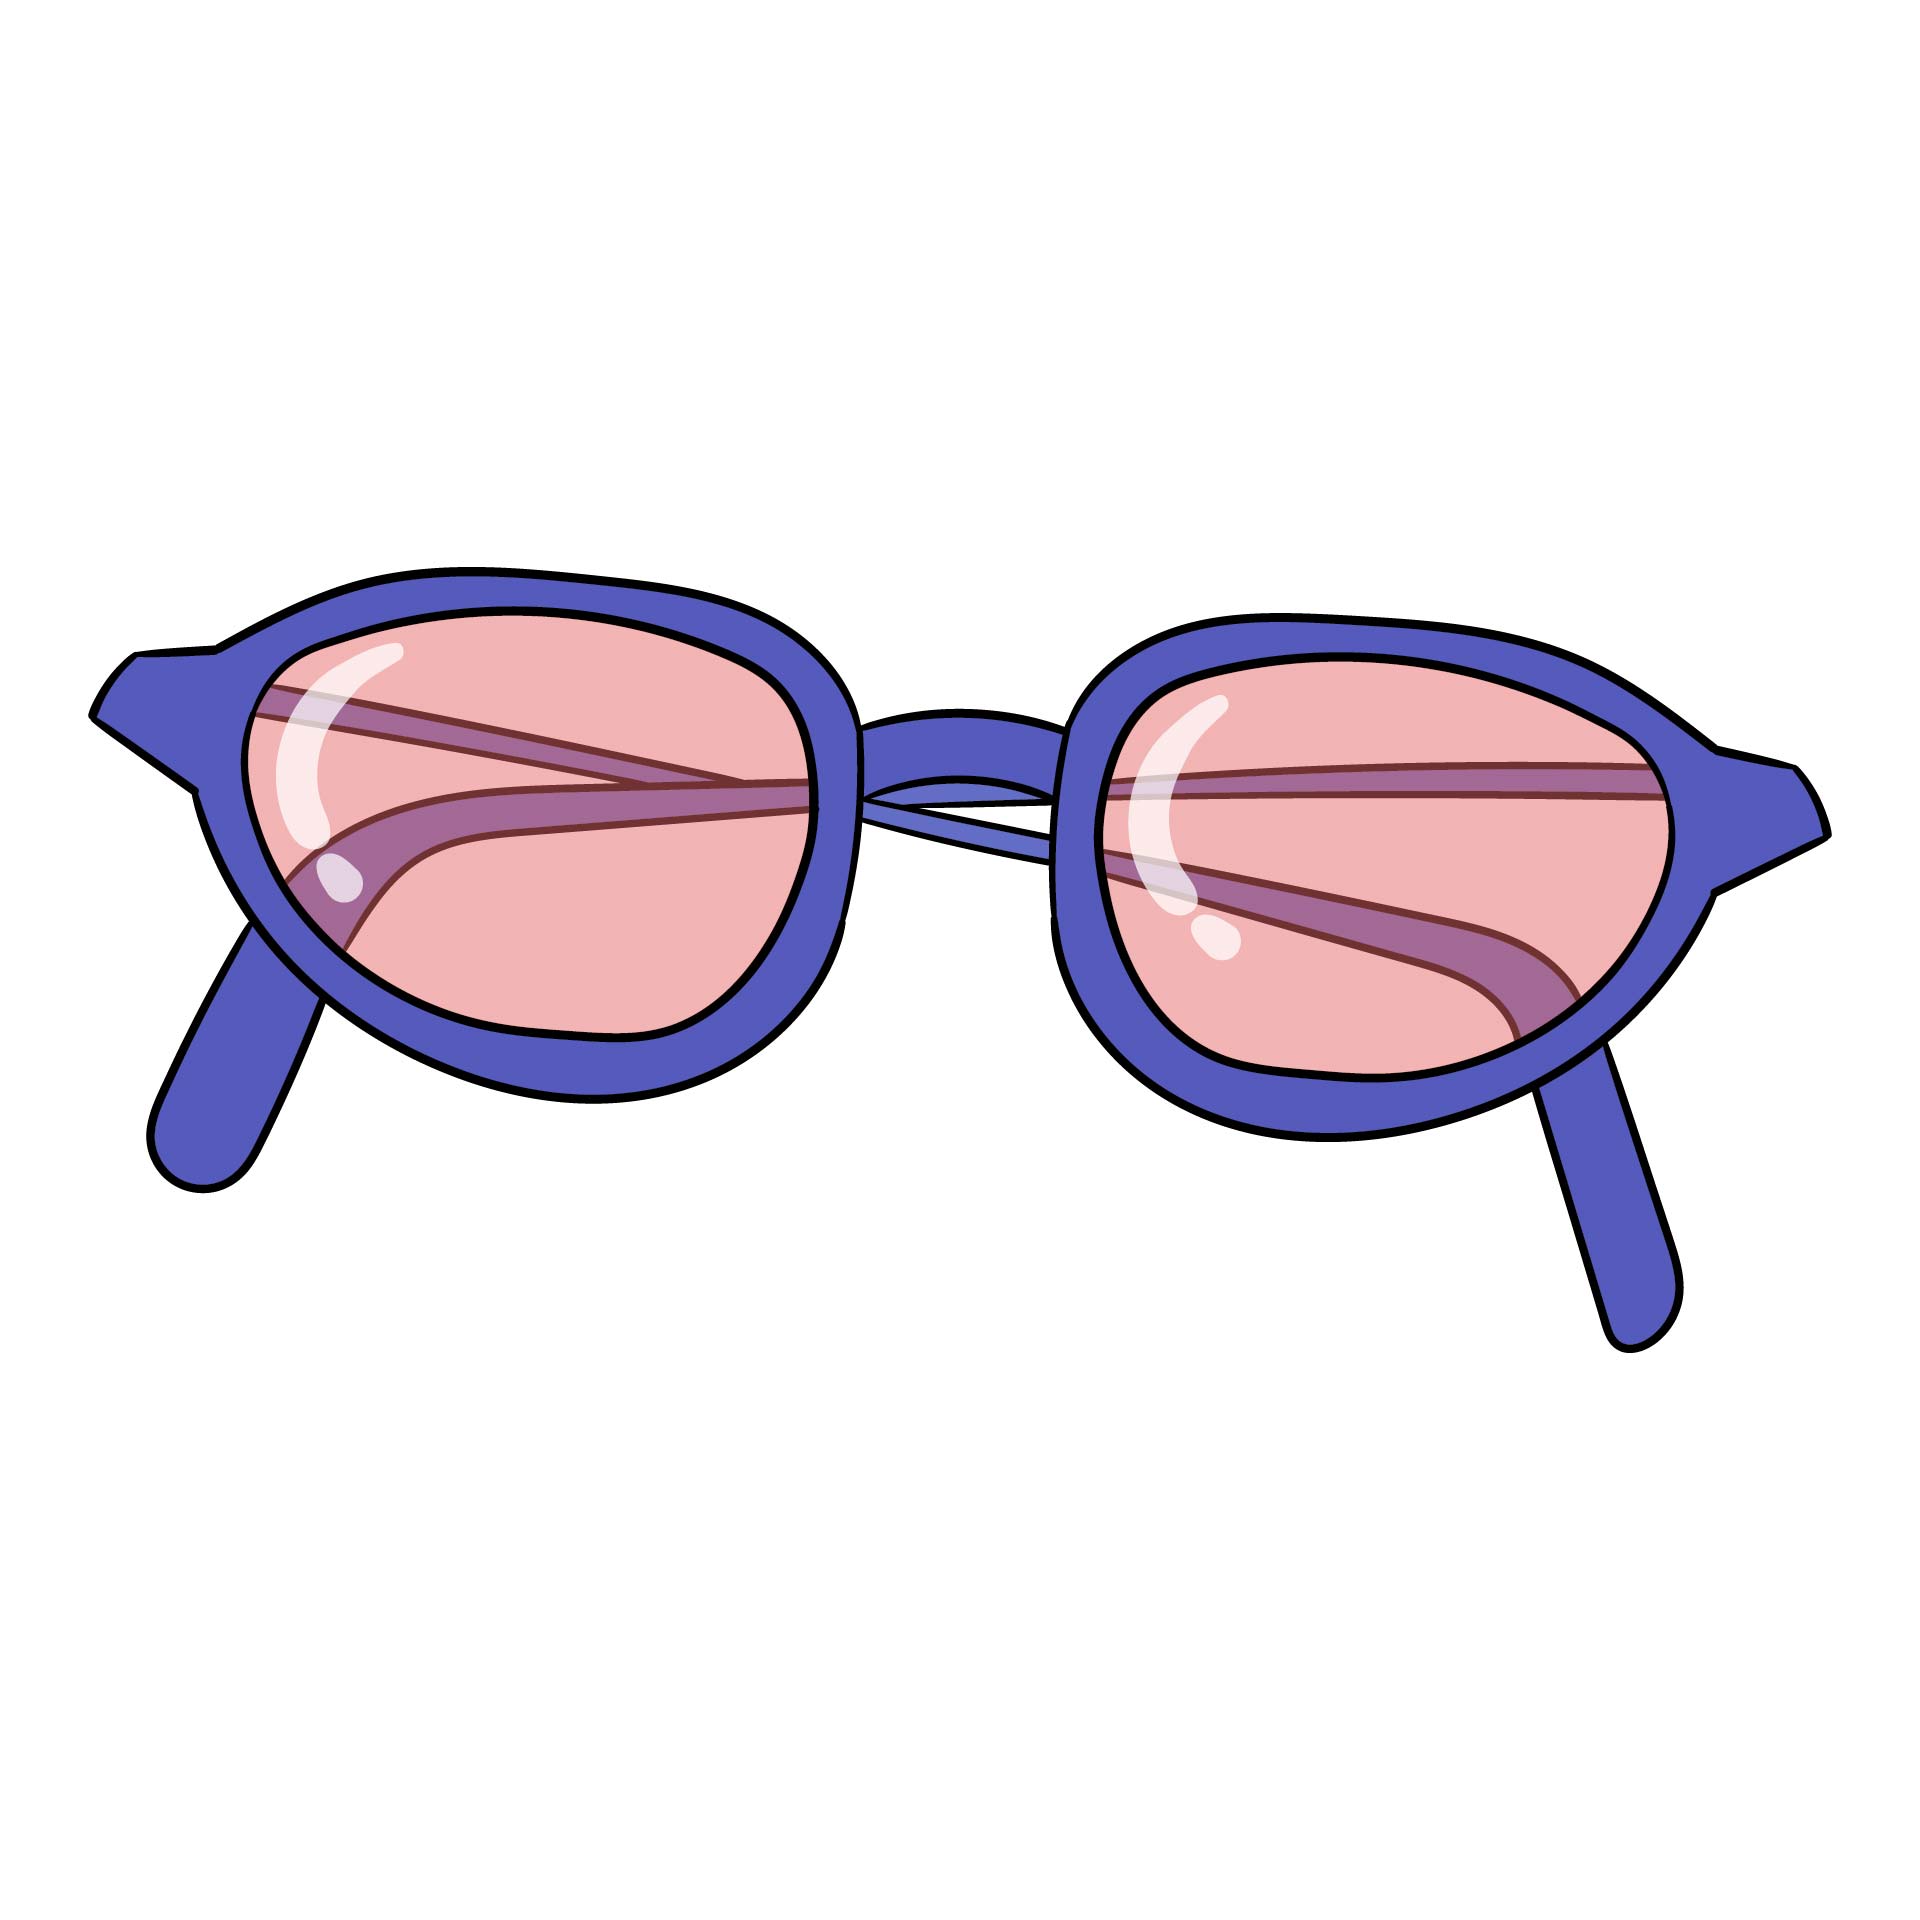 Sunglasses Template For Cut Out